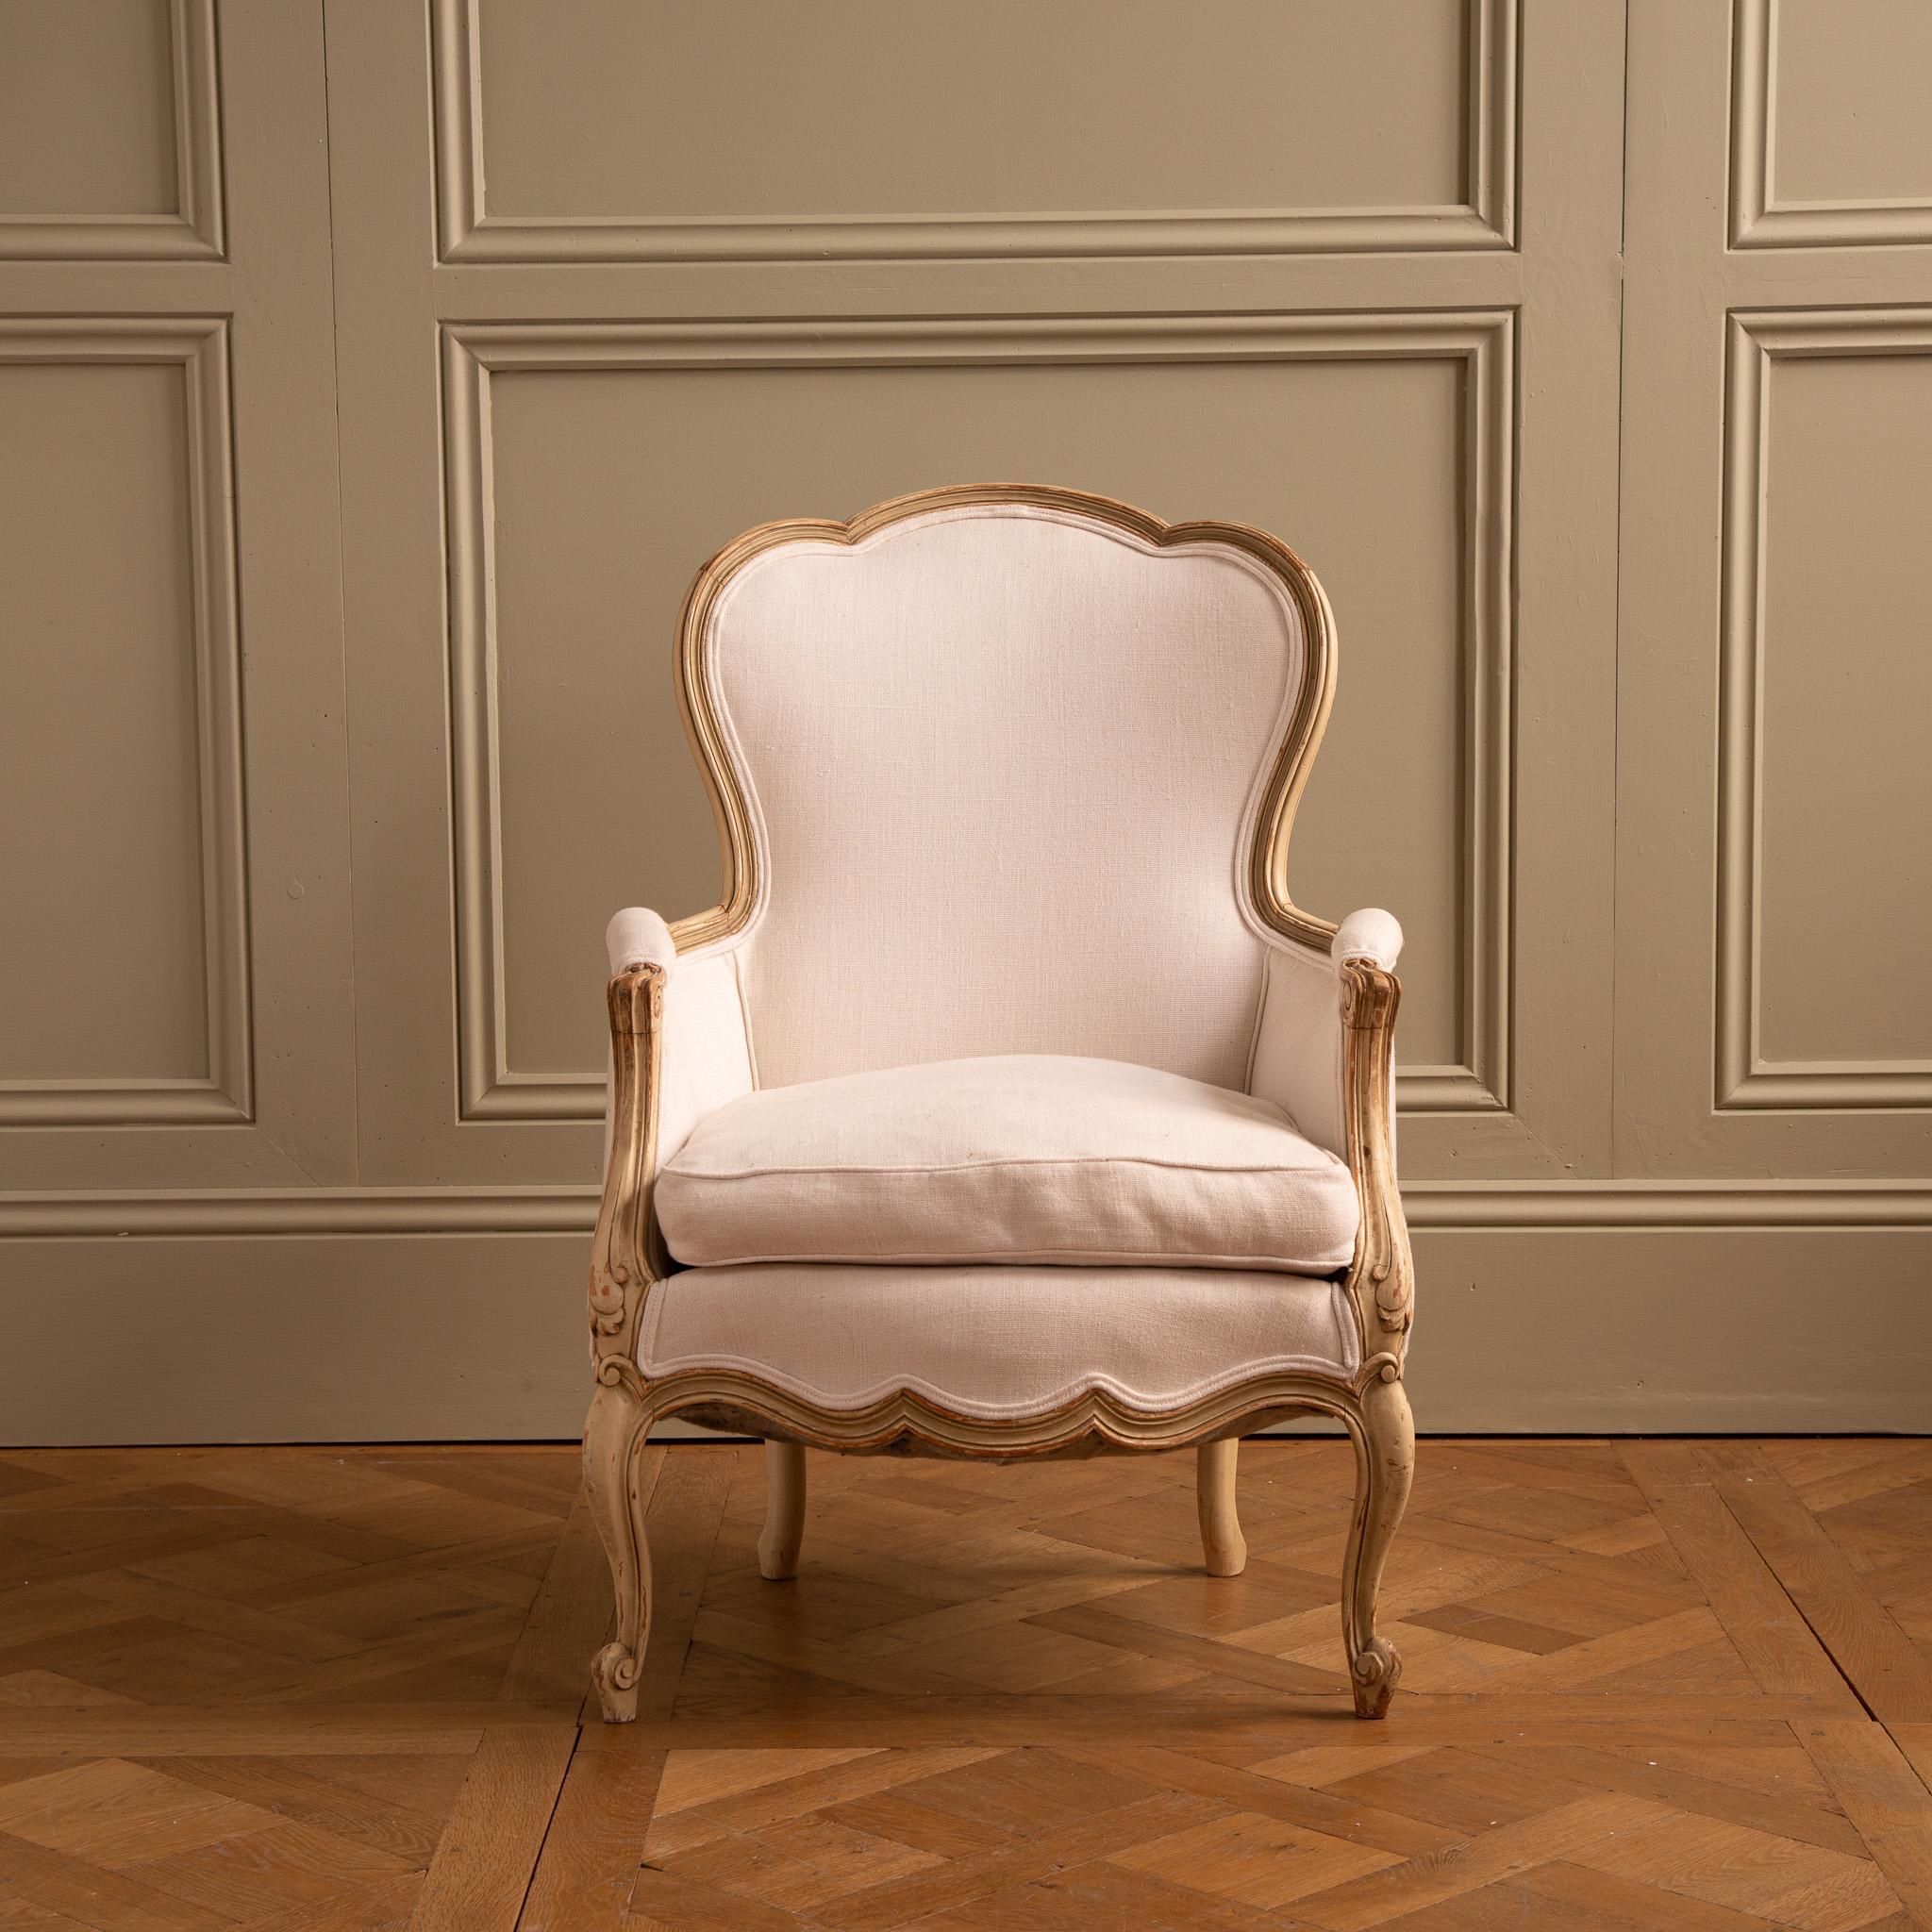 A Swedish, Gustavian style arm chair from the early 1900's, carved in solid beech wood and hand painted in a warm white which has naturally aged to reveal some of the wood beneath. The chair has comfortable proportions with a feather cushioned seat